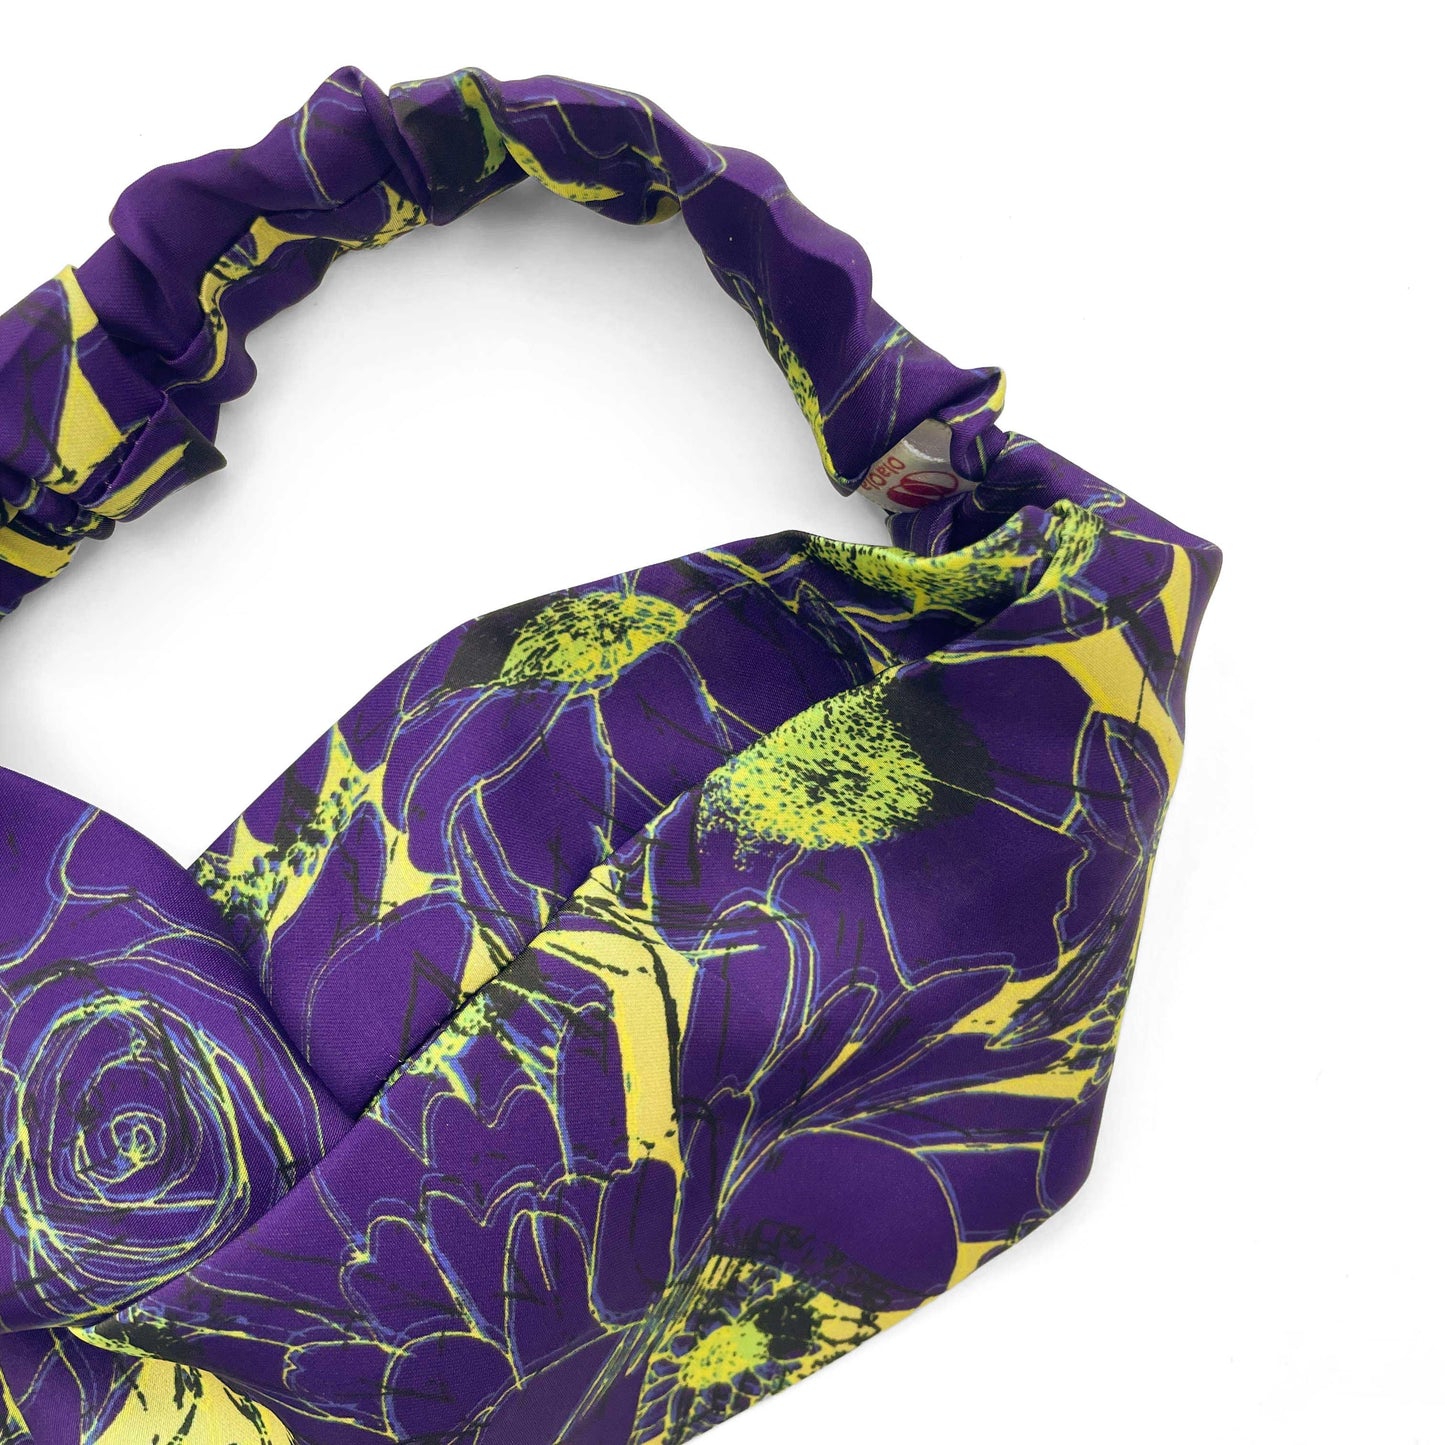 Silky Satin Knot Turban Headband With Late Bloom Floral Pattern